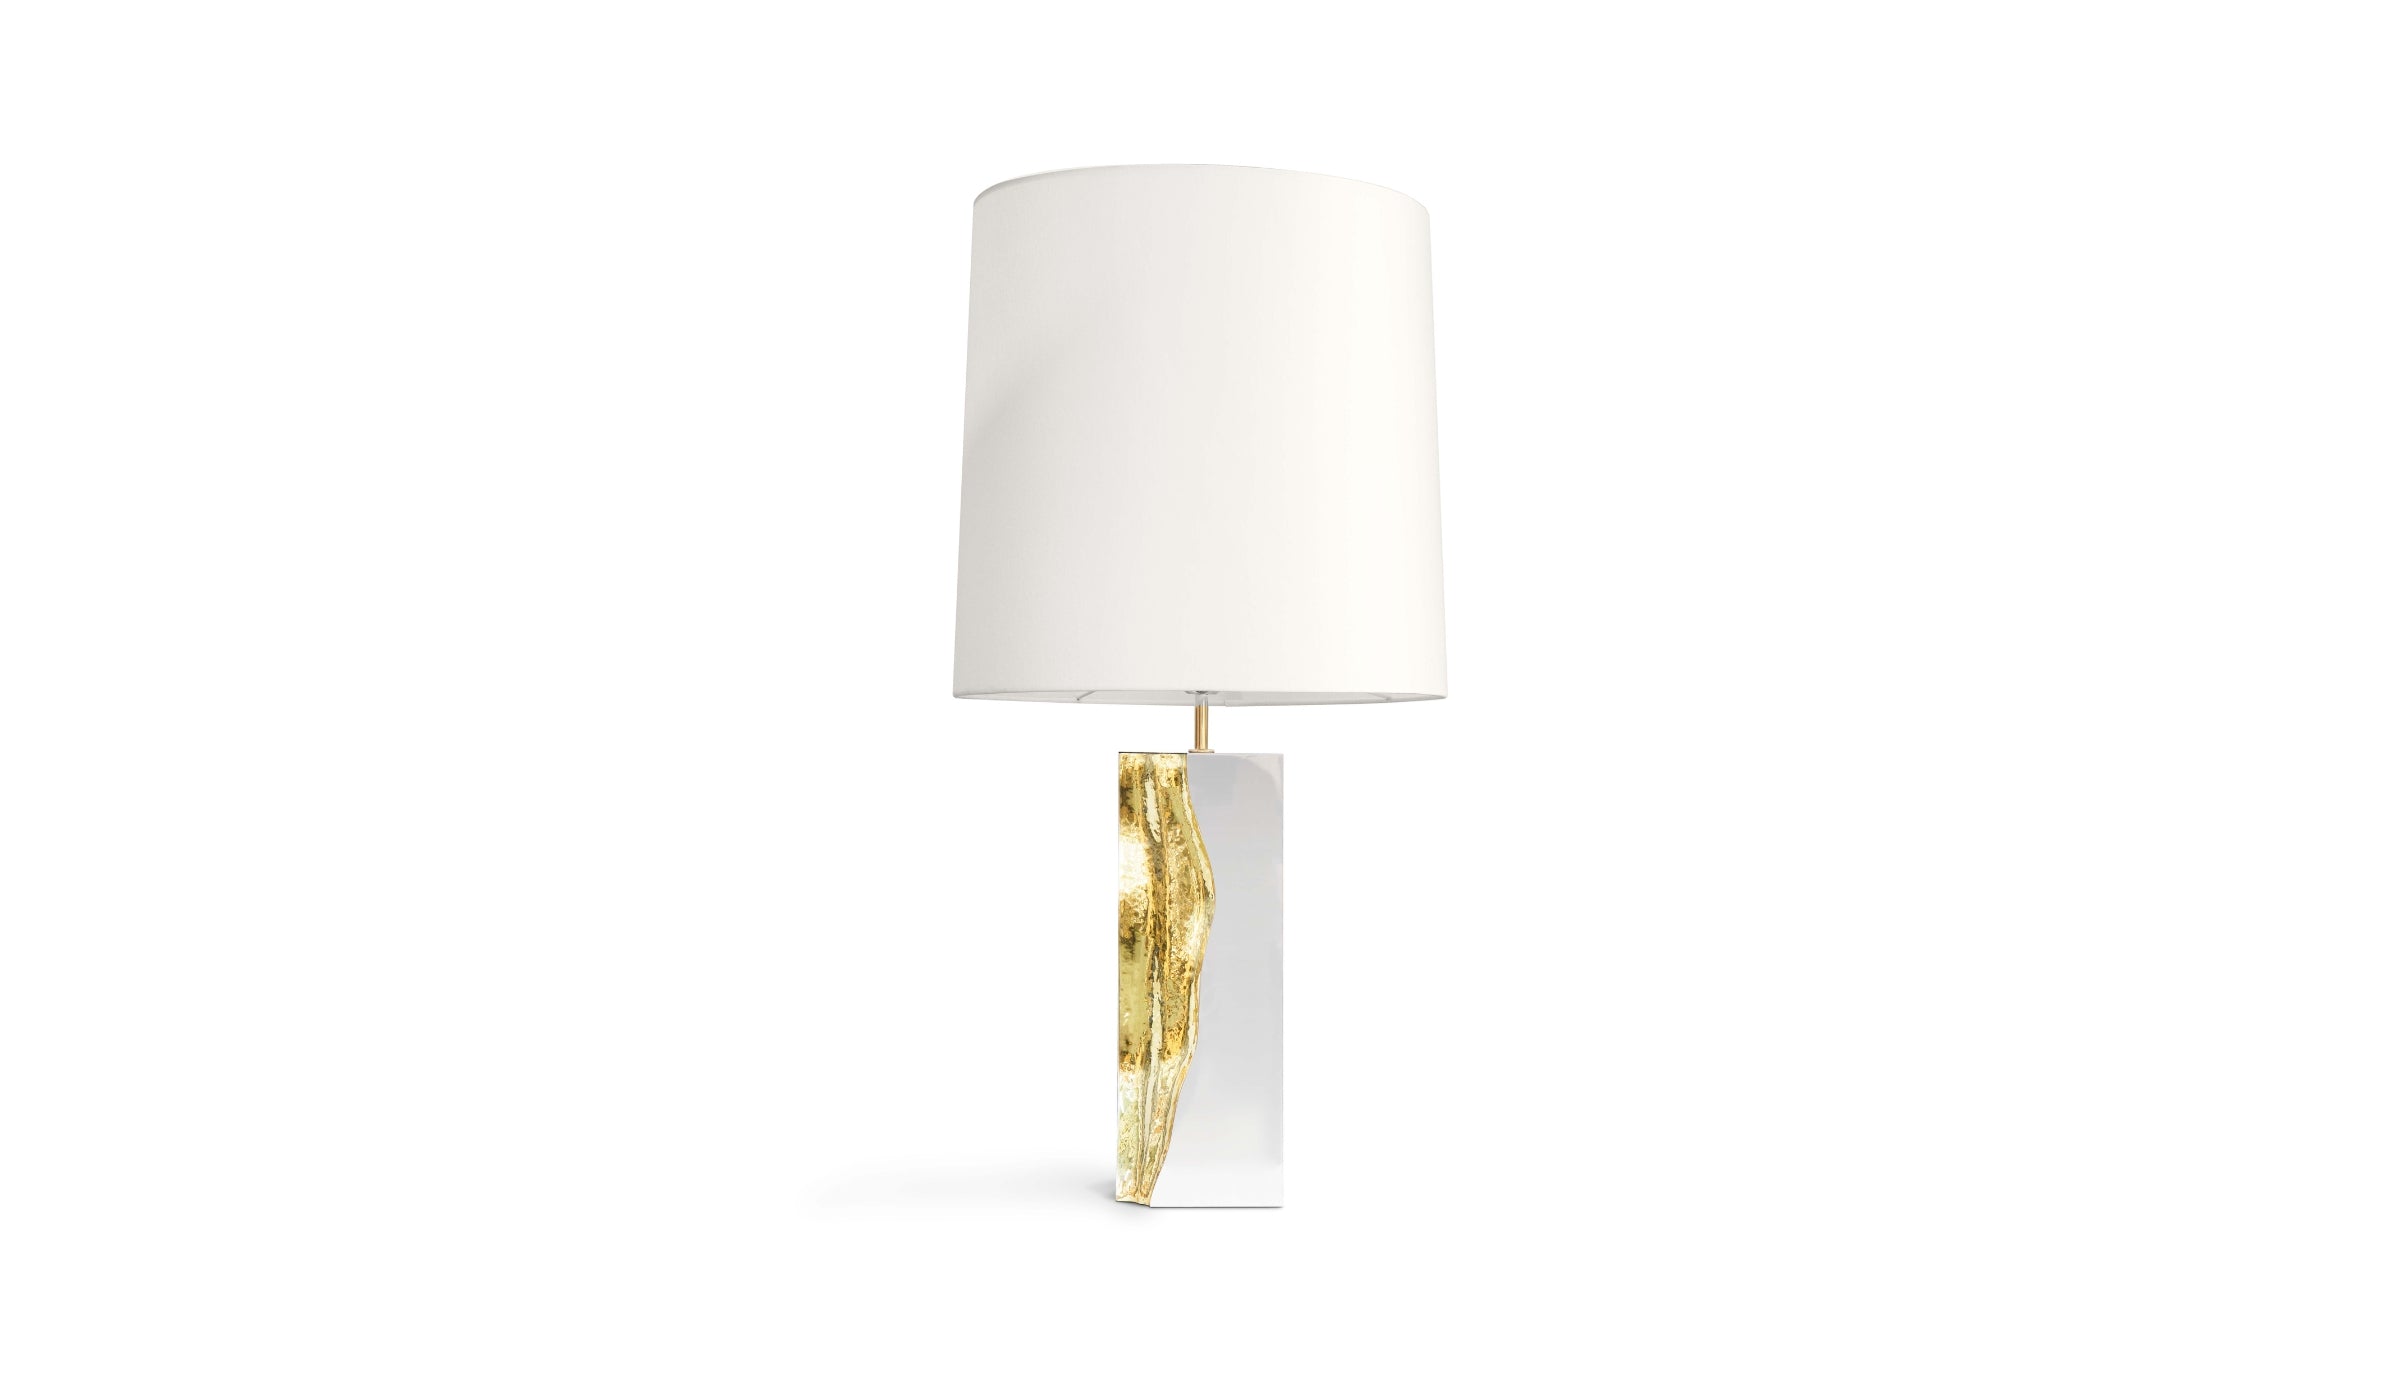 Lapiaz - Ribbling table lamp in stainless steel Mirror effect and polished brass